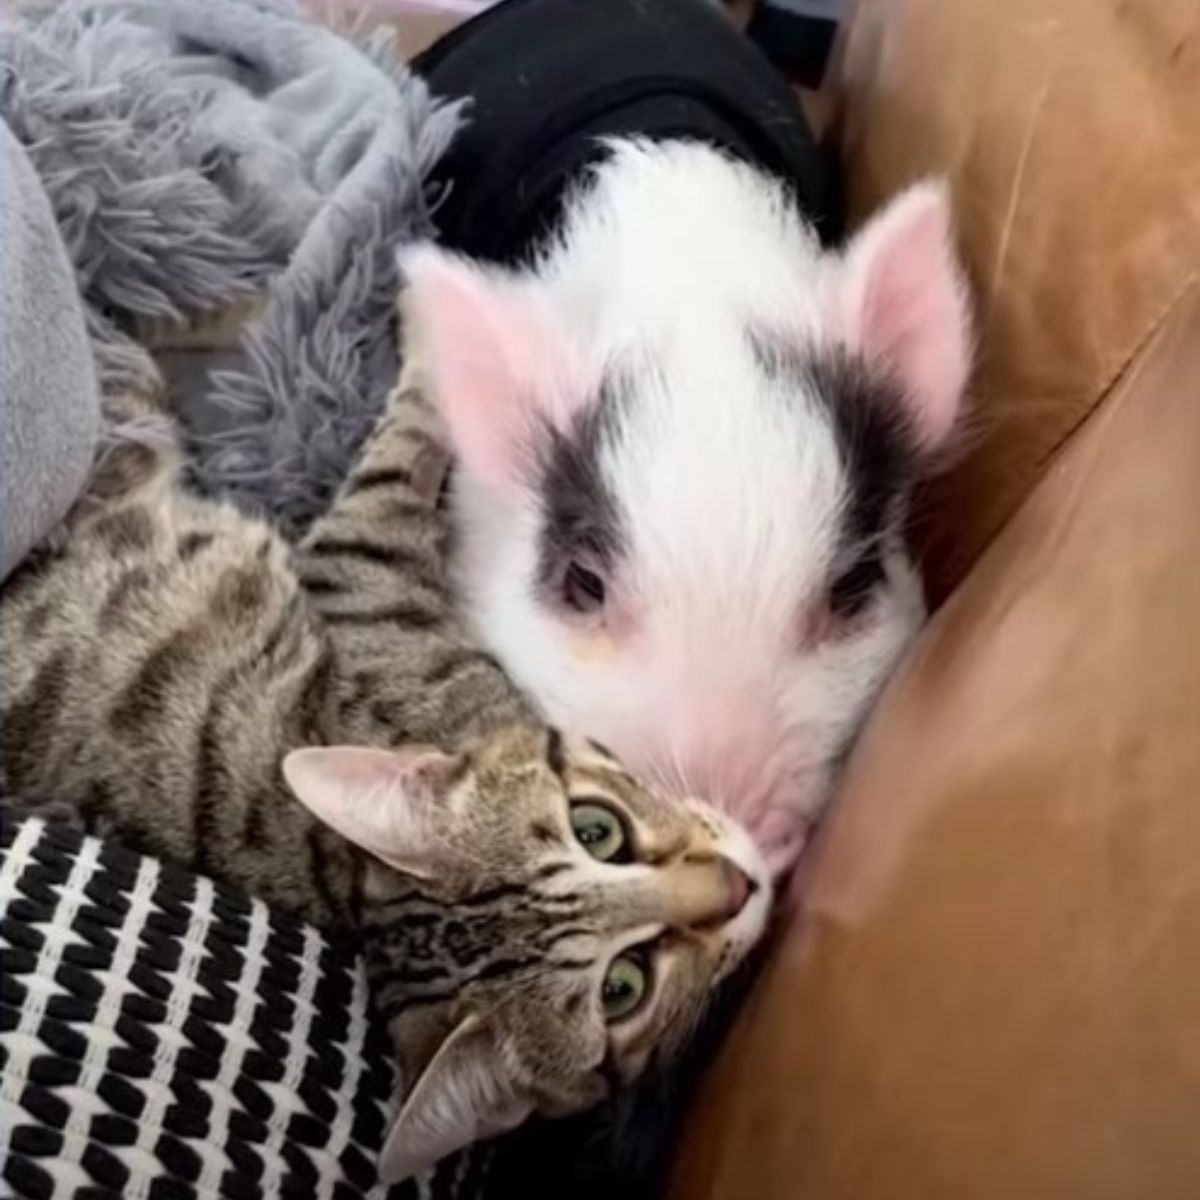 close-up photo of kitten and piglet on a couch